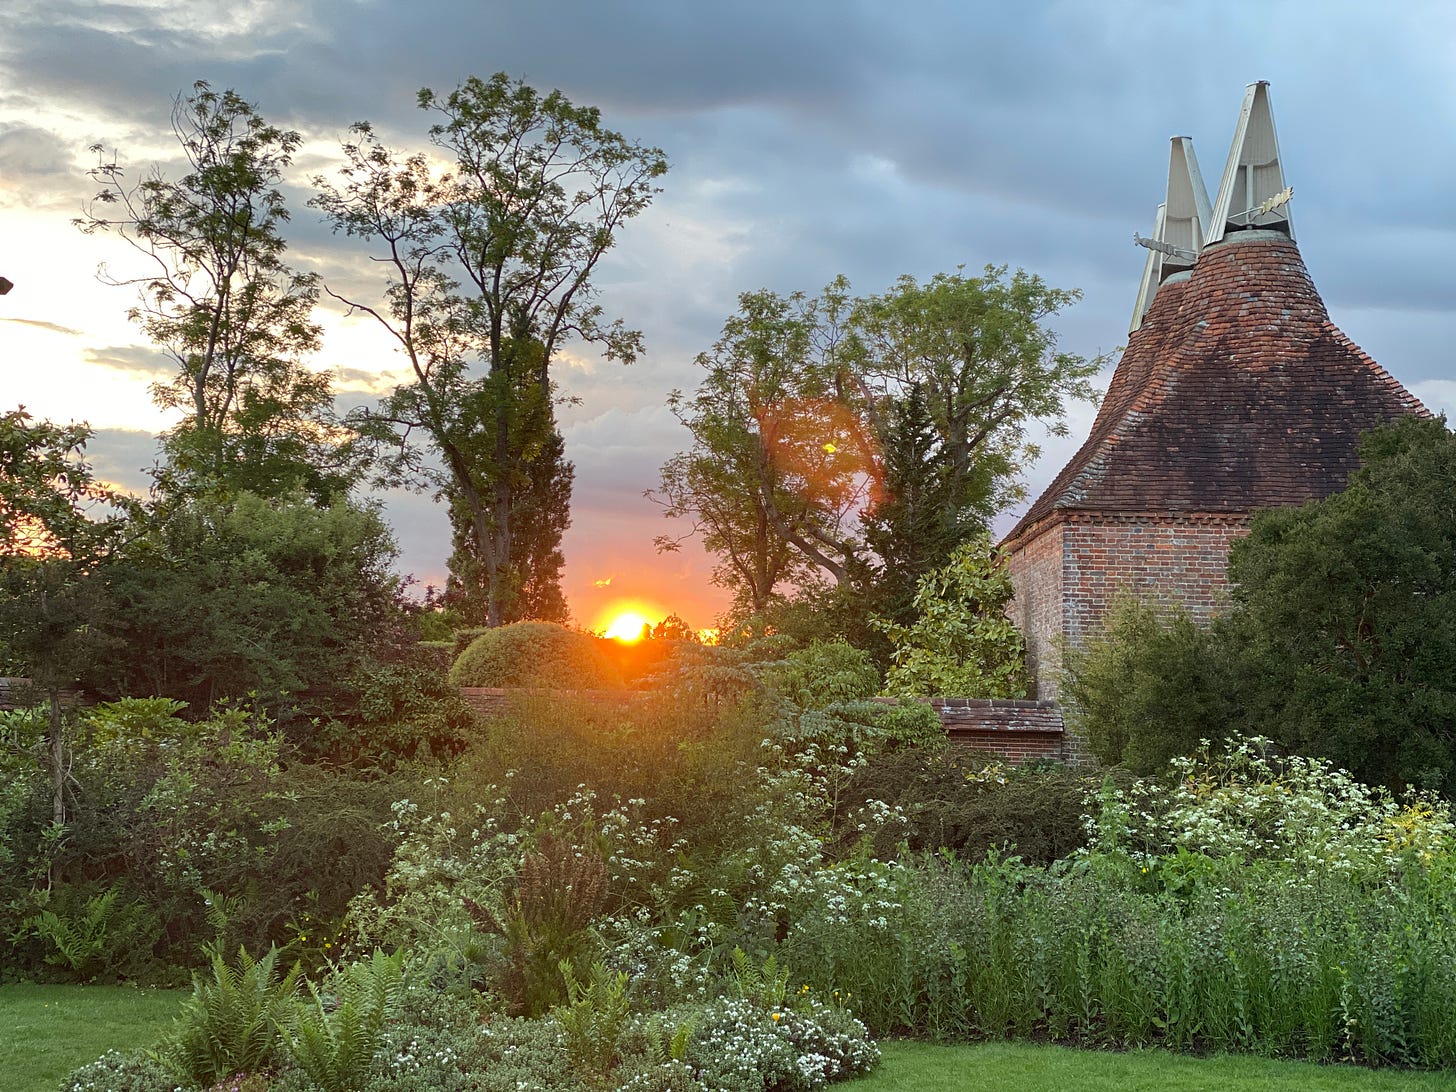 The old oast houses for drying hops at Great Dixter just at sunset. Photo by Marianne Willburn